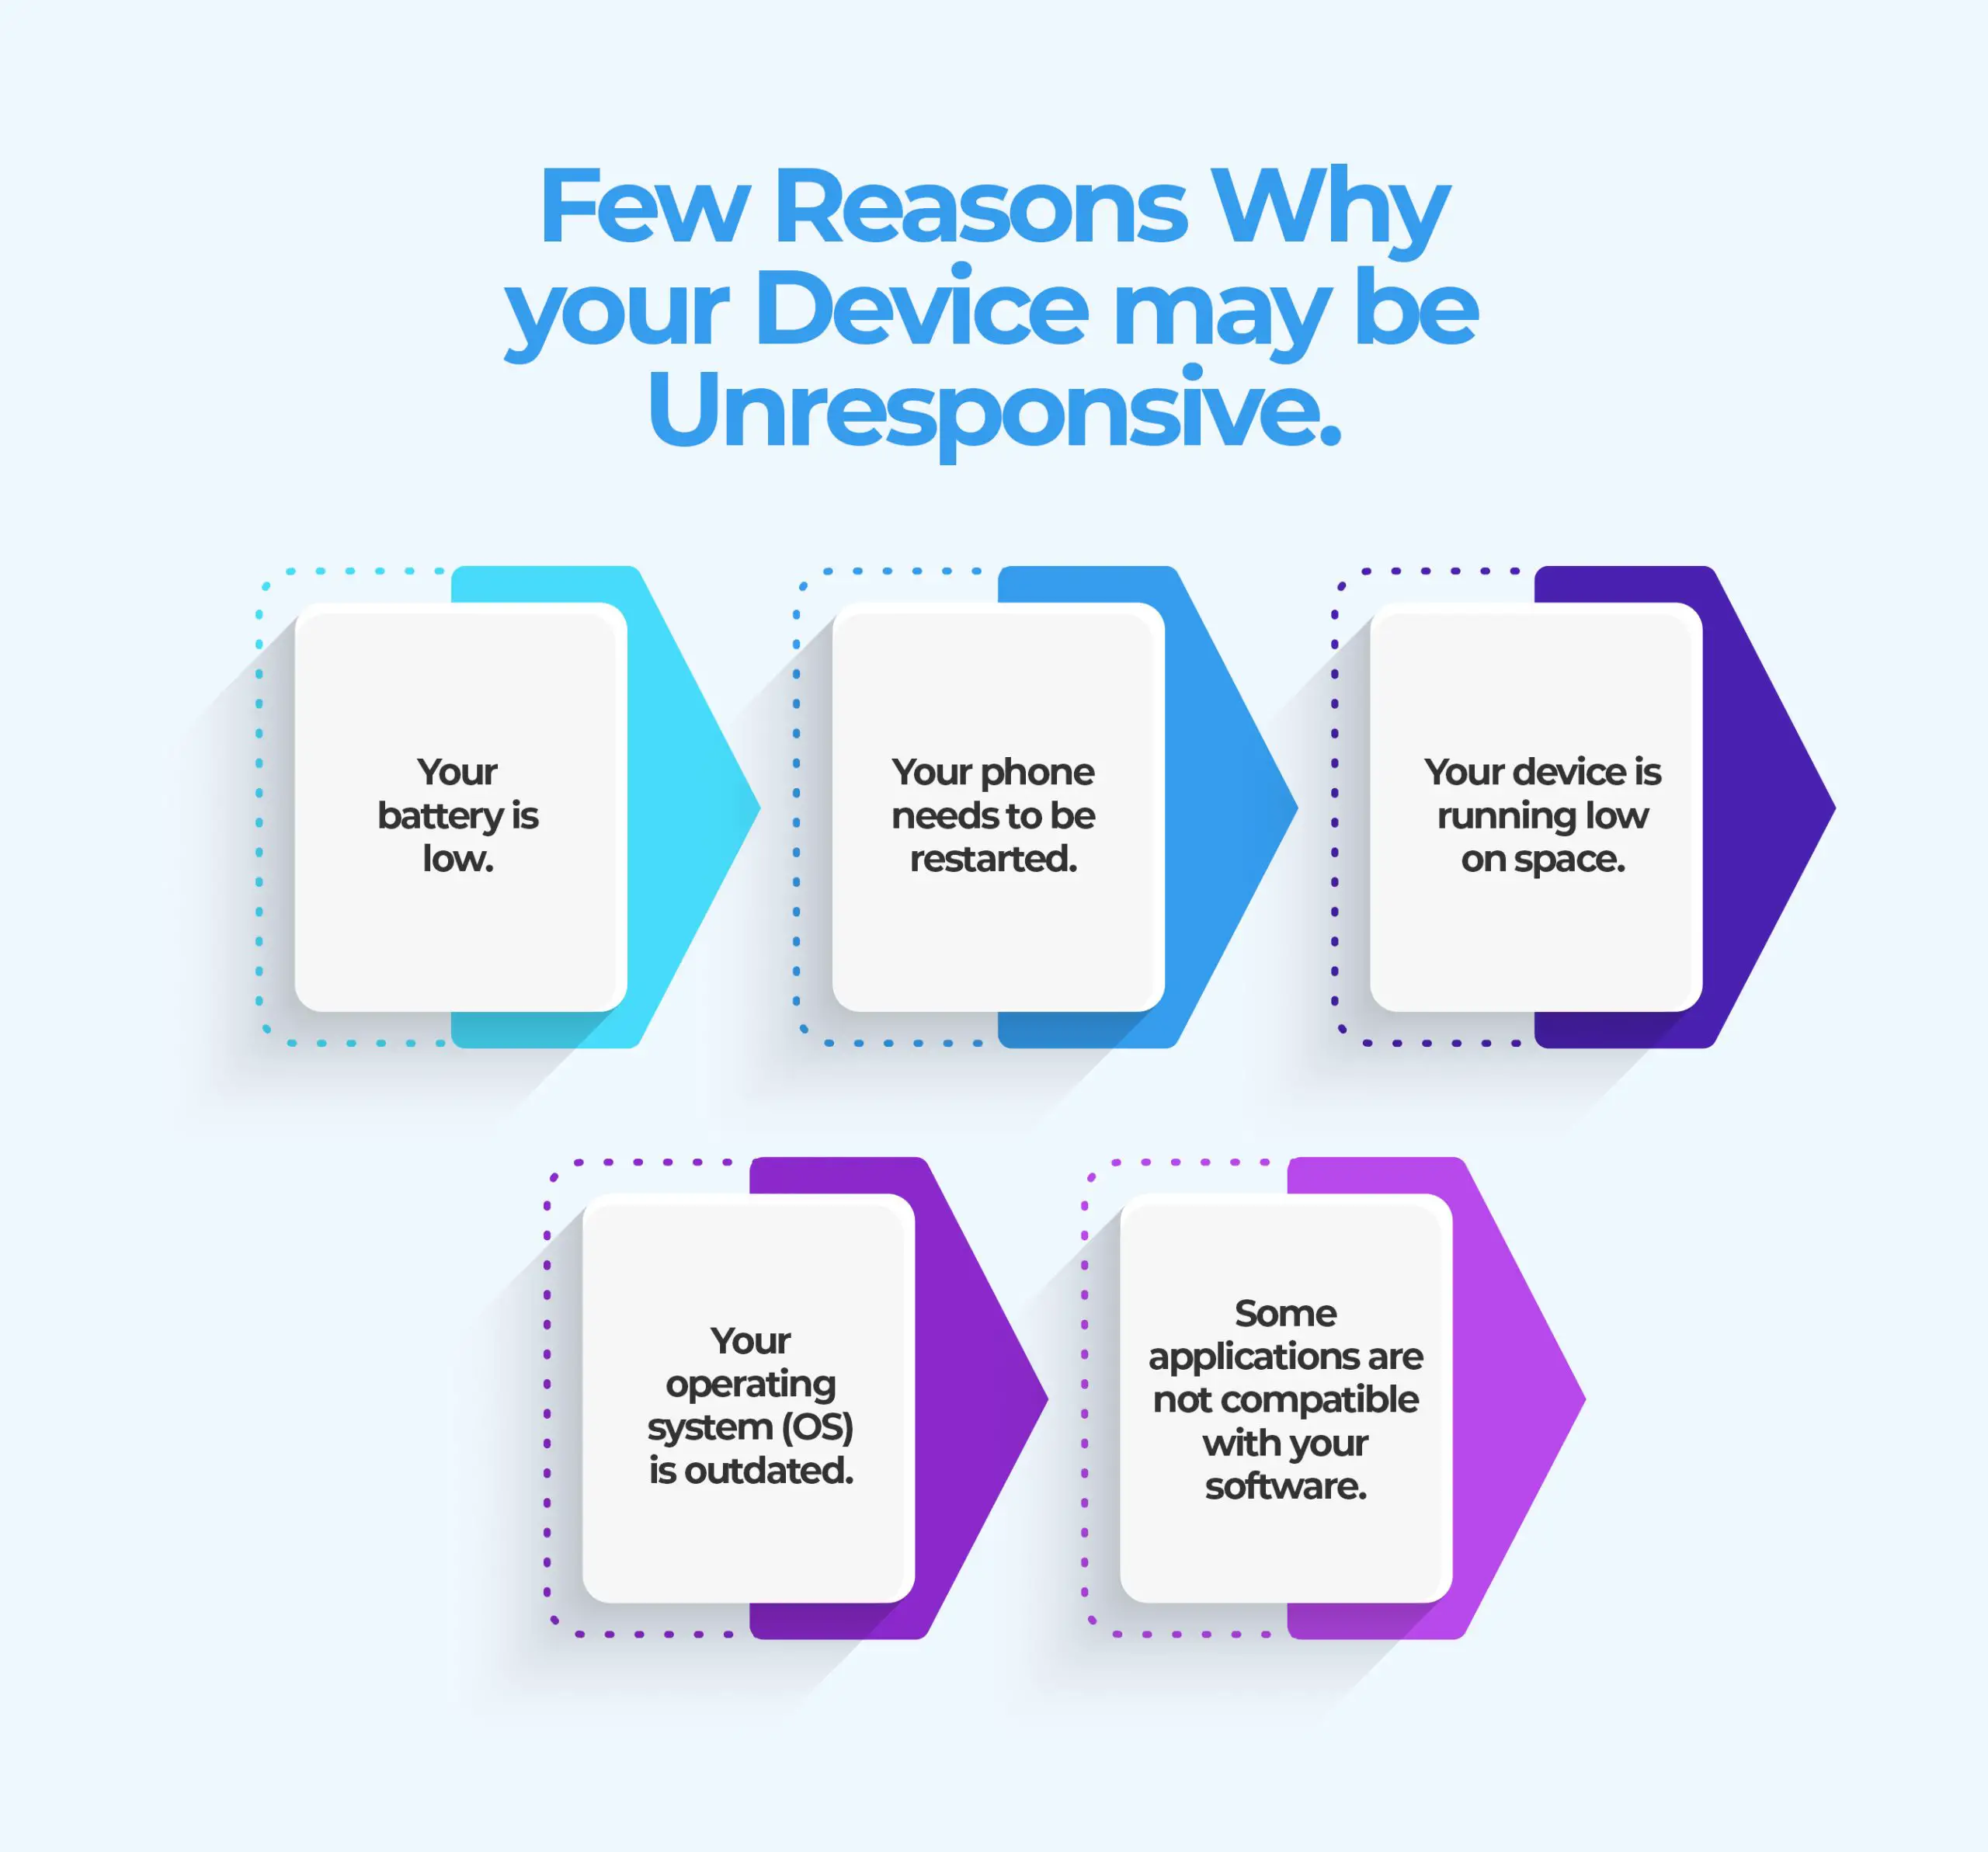 Few Reasons Why Your Device May Be Unresponsive